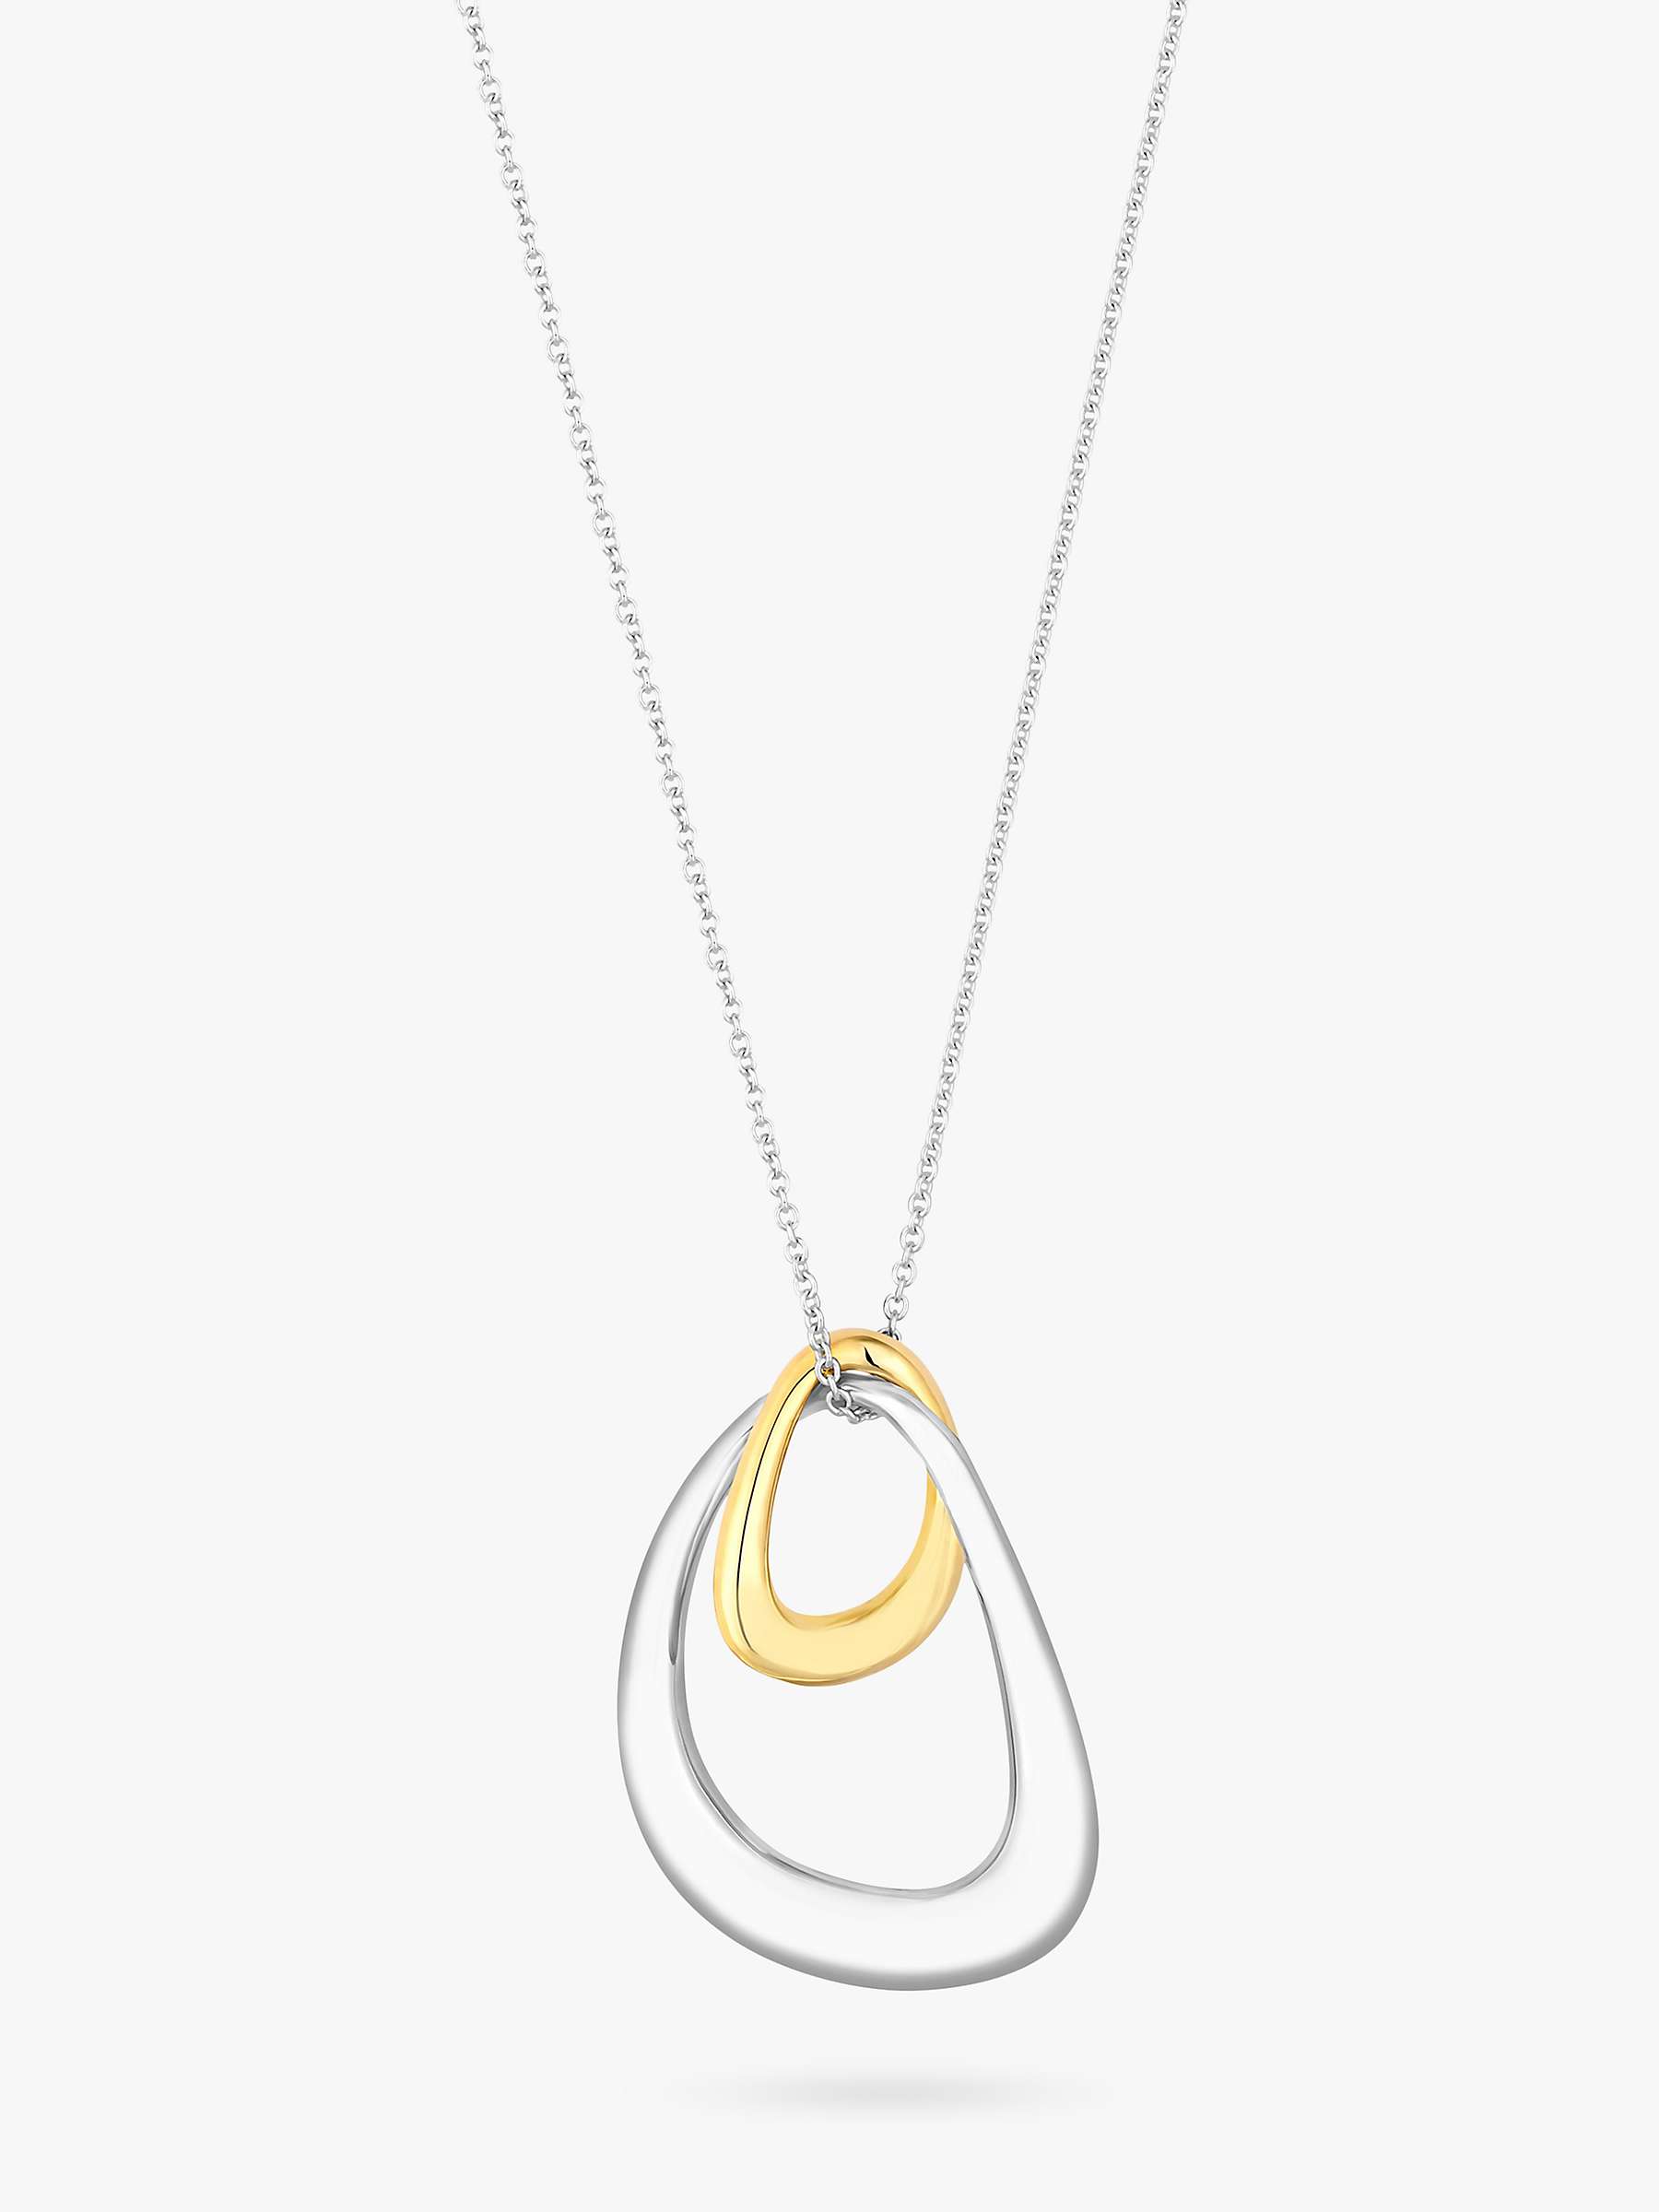 Buy Simply Silver Two Tone Pendant Necklace, Silver/Gold Online at johnlewis.com